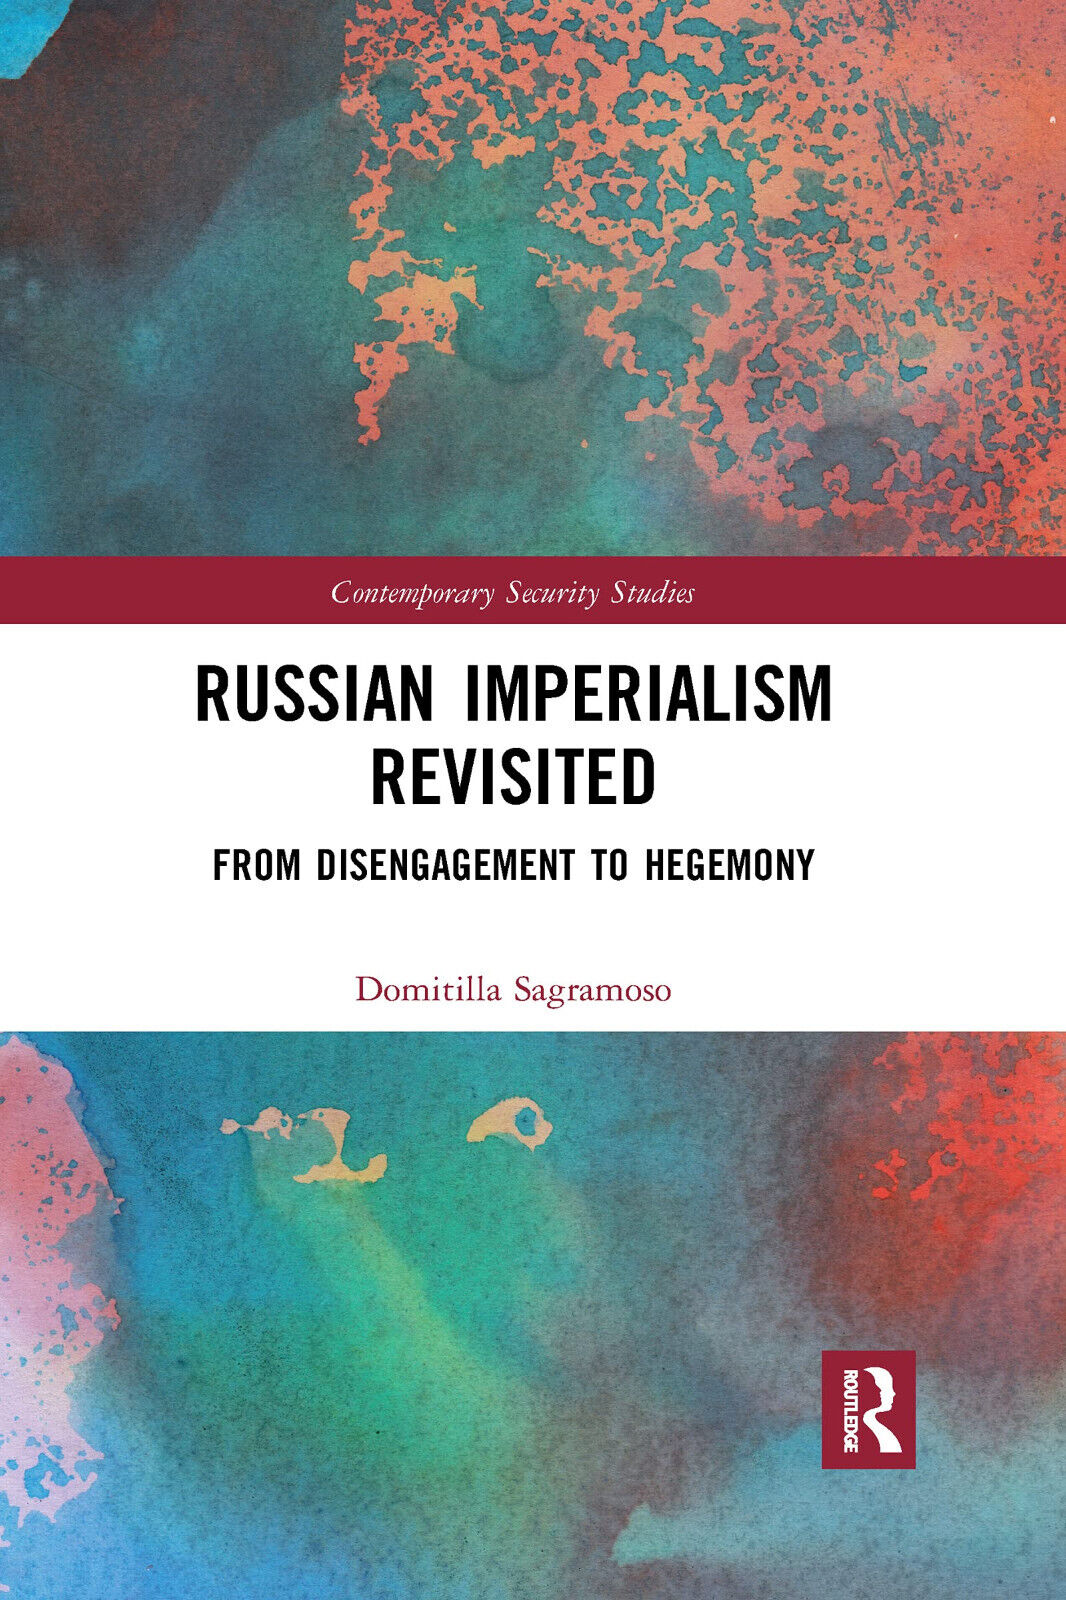 Russian Imperialism Revisited - Domitilla Sagramoso - Routledge, 2021